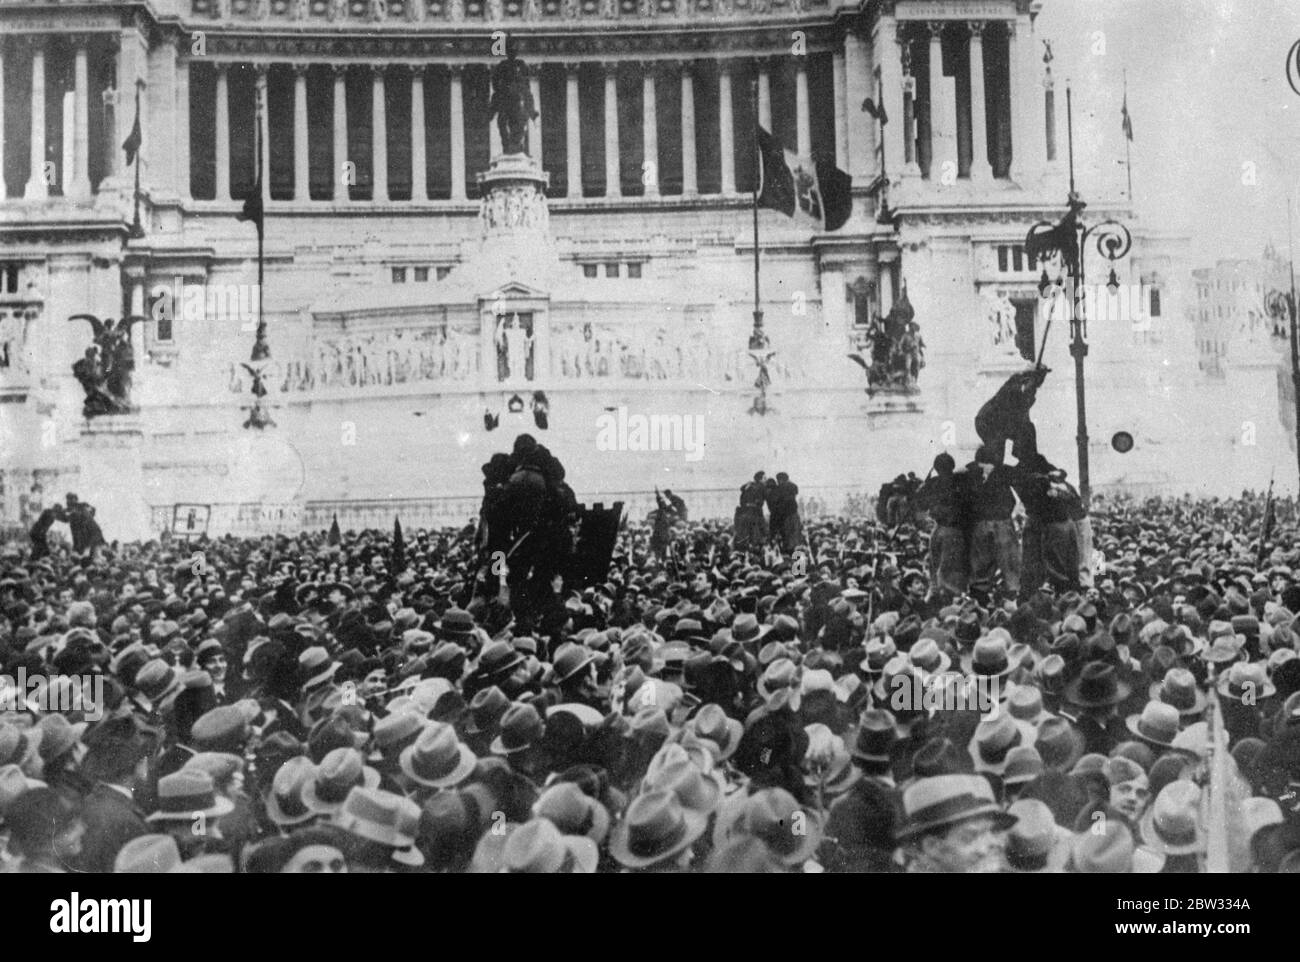 Black shirts celebrate thirteenth anniversary of birth of fascism . Thousands of Fascists gathered in the Venice square , in Rome to celebrate the thirteenth anniversary of the foundation of the Italian Fascist movement . A view of a portion of the enormous crowd of Black shirts listening to Signor mussolini at the meeting in Rome . 29 March 1932 Stock Photo